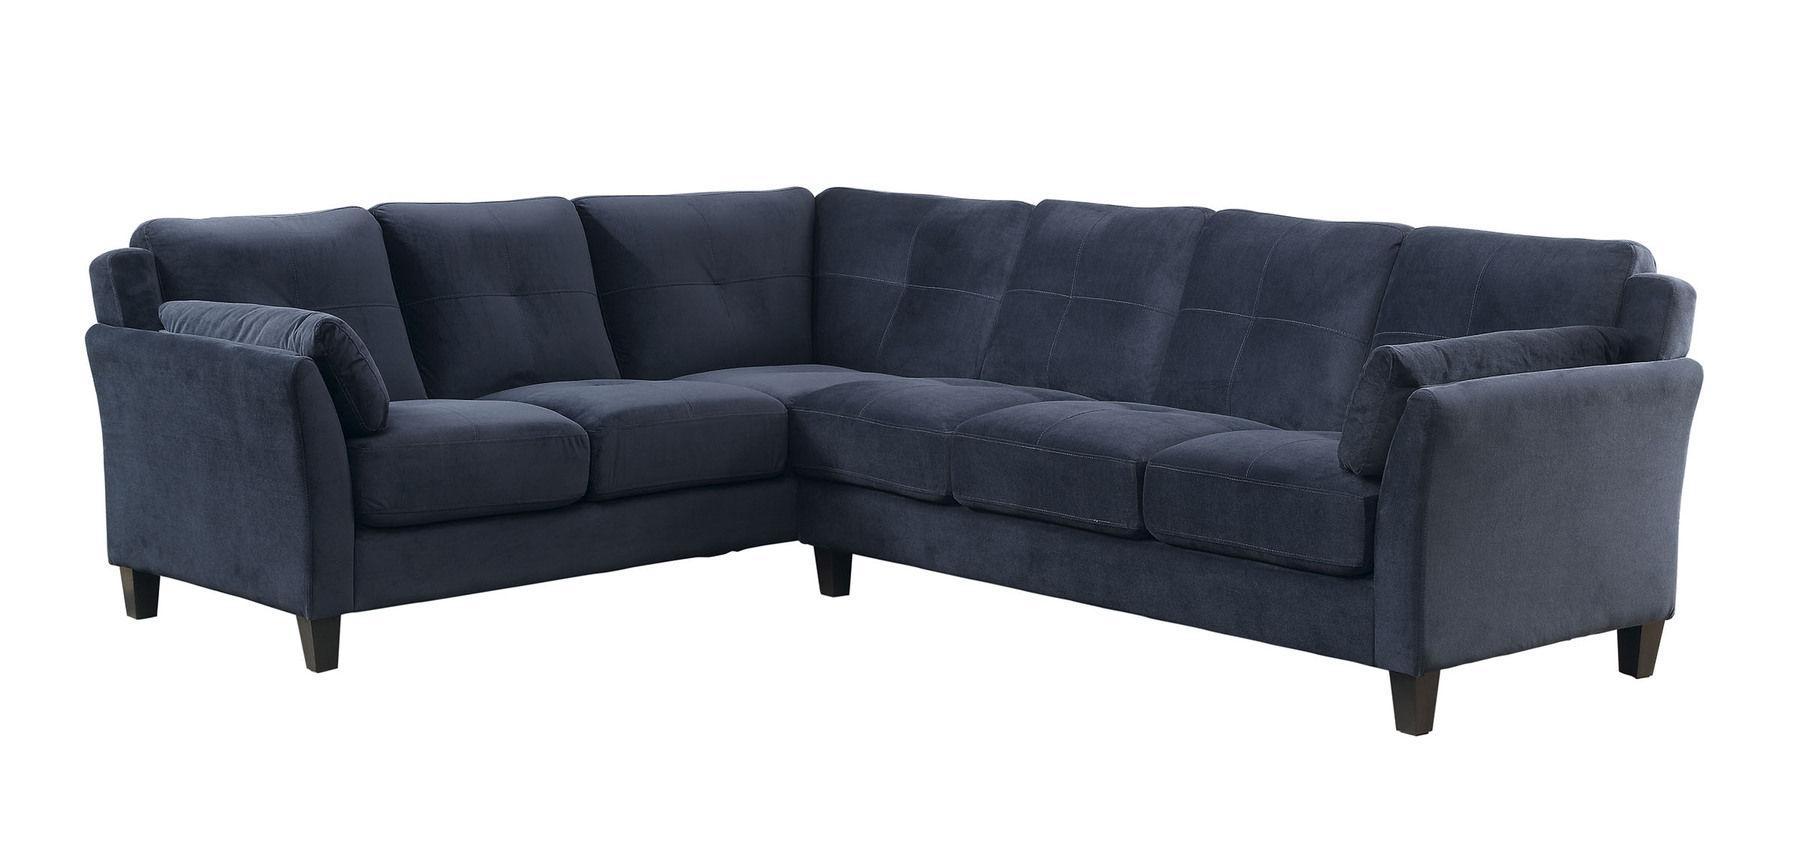 Contemporary Sectional Sofa PEEVER CM6368NV CM6368NV in Navy 